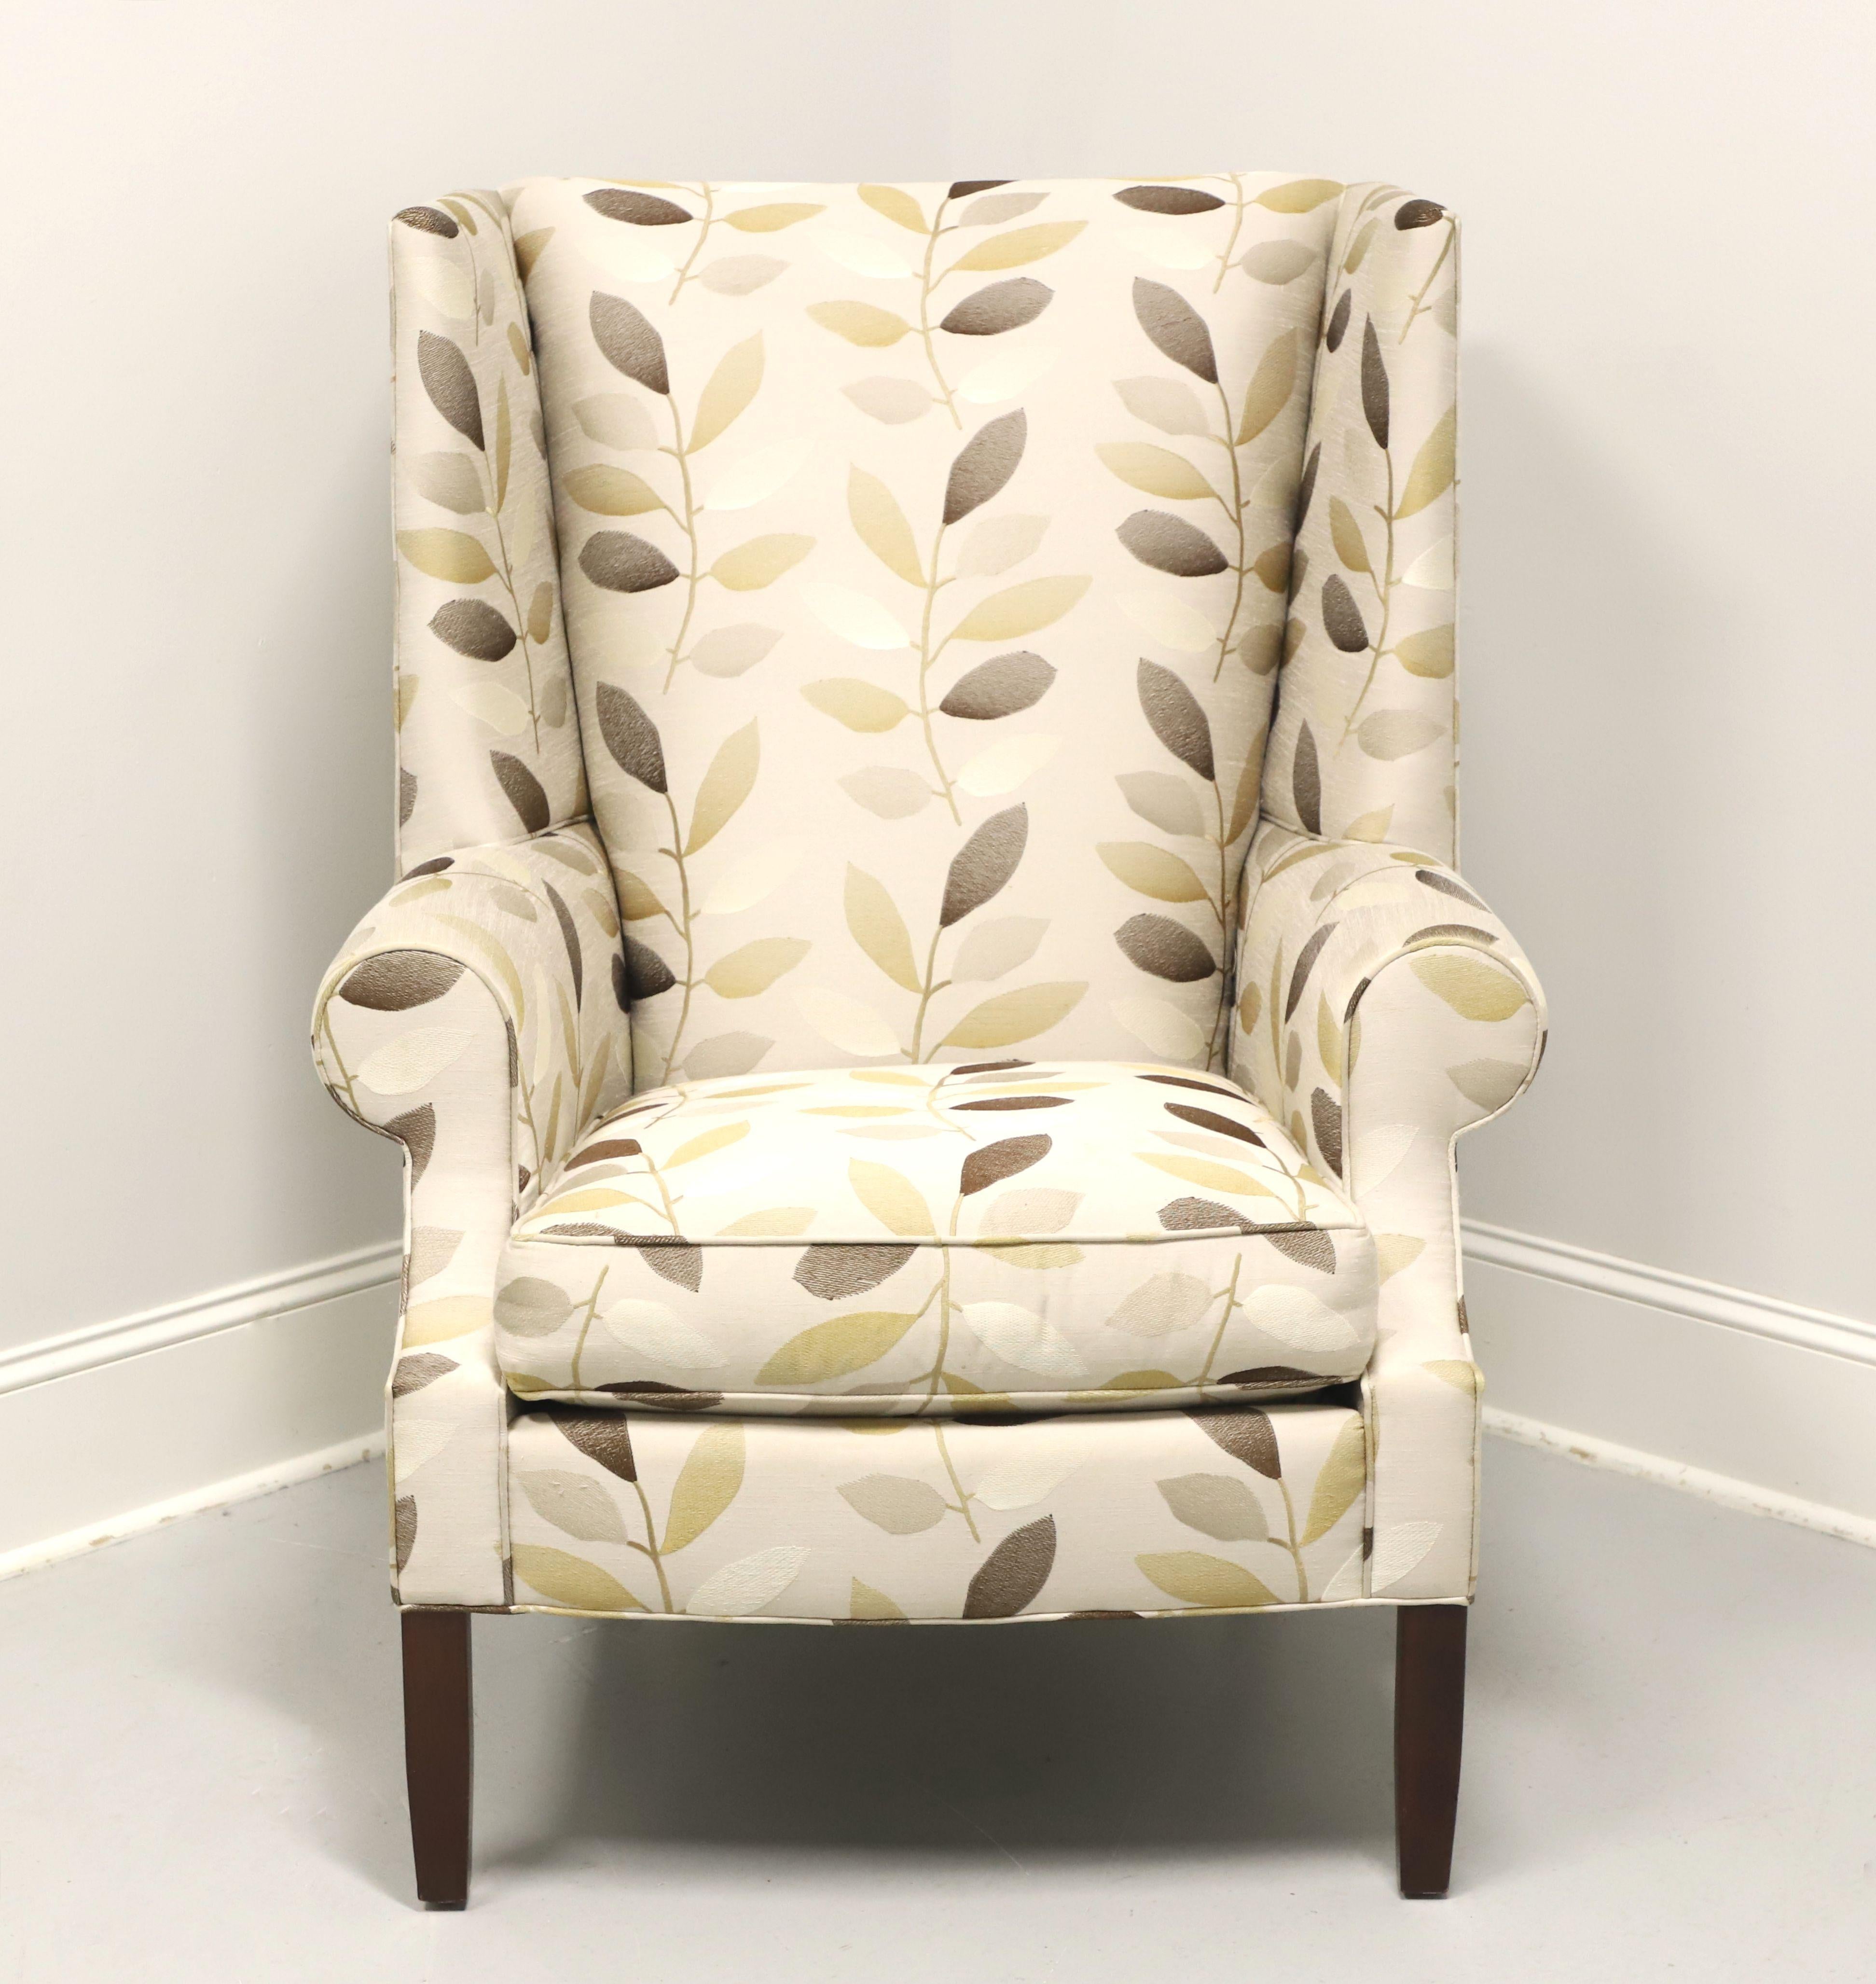 A Transitional style wing back chair by Stickley Furniture, their Park City. Fabric upholstered in a pattern of various neutral tone leaves amidst a beige color base on a cherry wood frame with their Metro finish to the tapered straight front legs